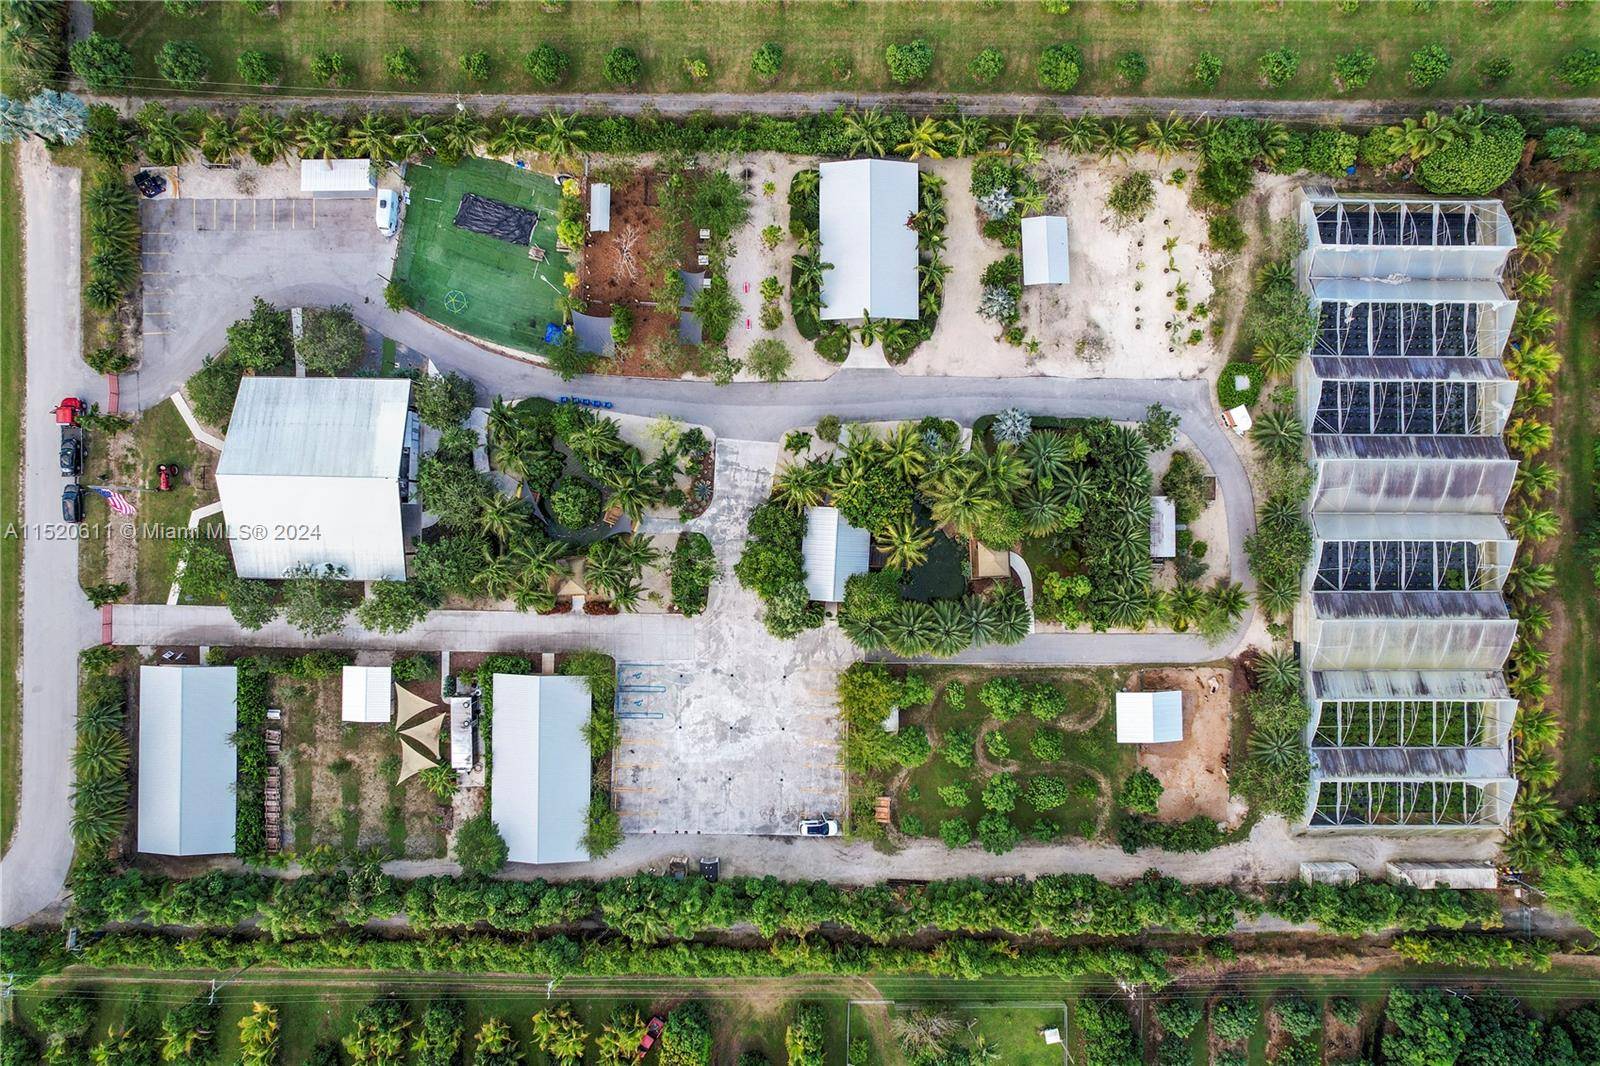 FARMHOUSE MIAMI A 5 ACRE TURNKEY AGRI TOURISM VENUE SITUATED BETWEEN BISCAYNE NAT.